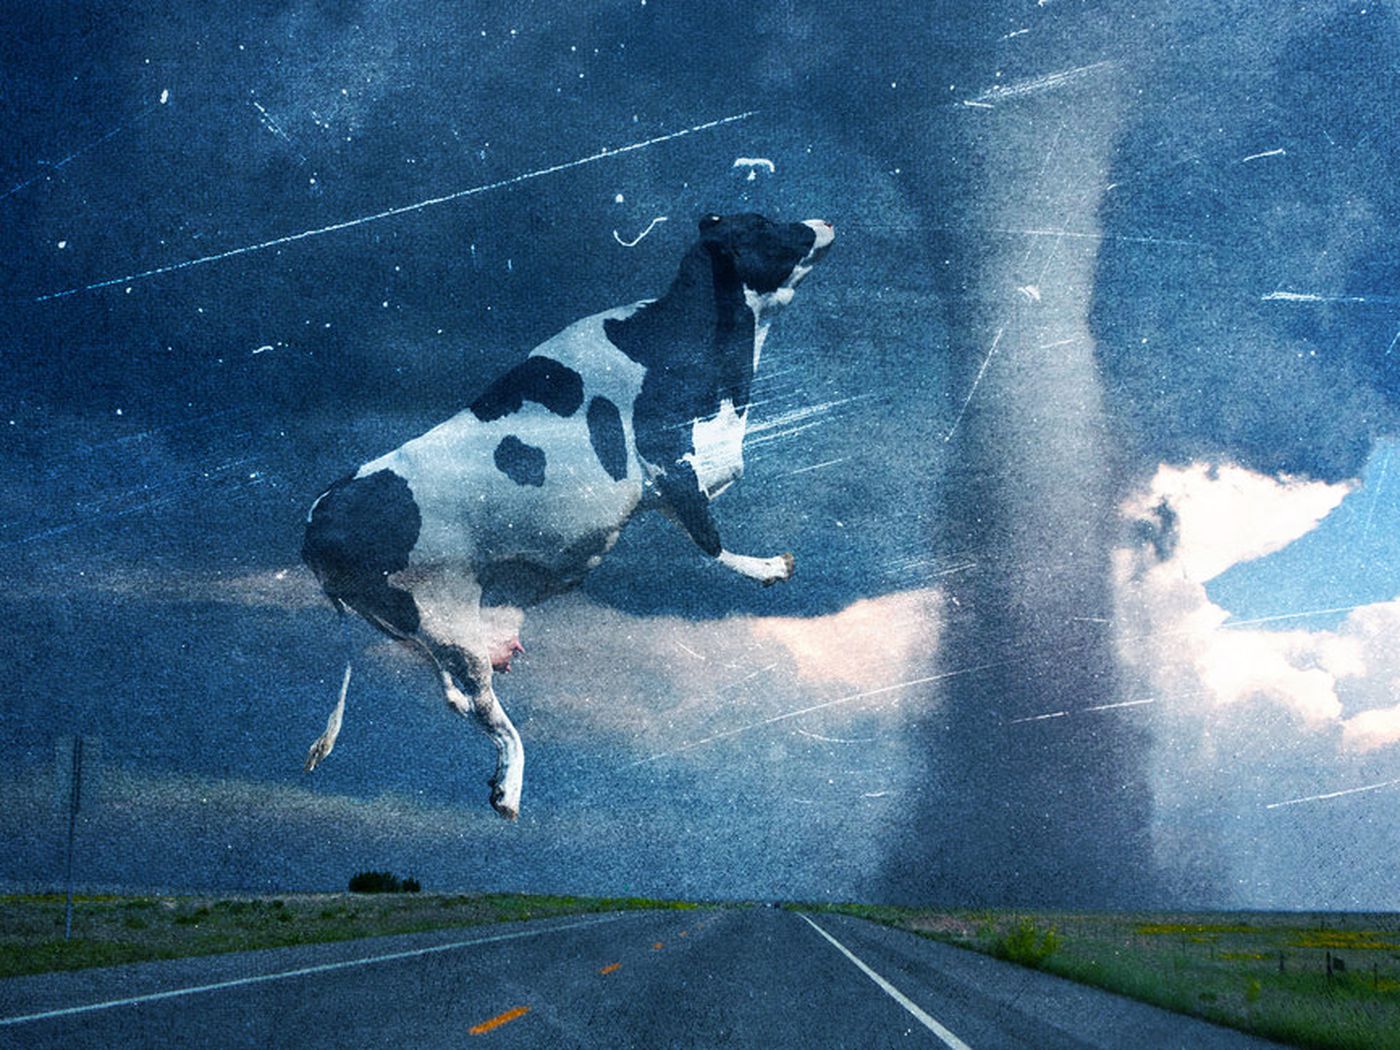 How They Made a Cow Fly Through a Tornado in 'Twister' - The Ringer